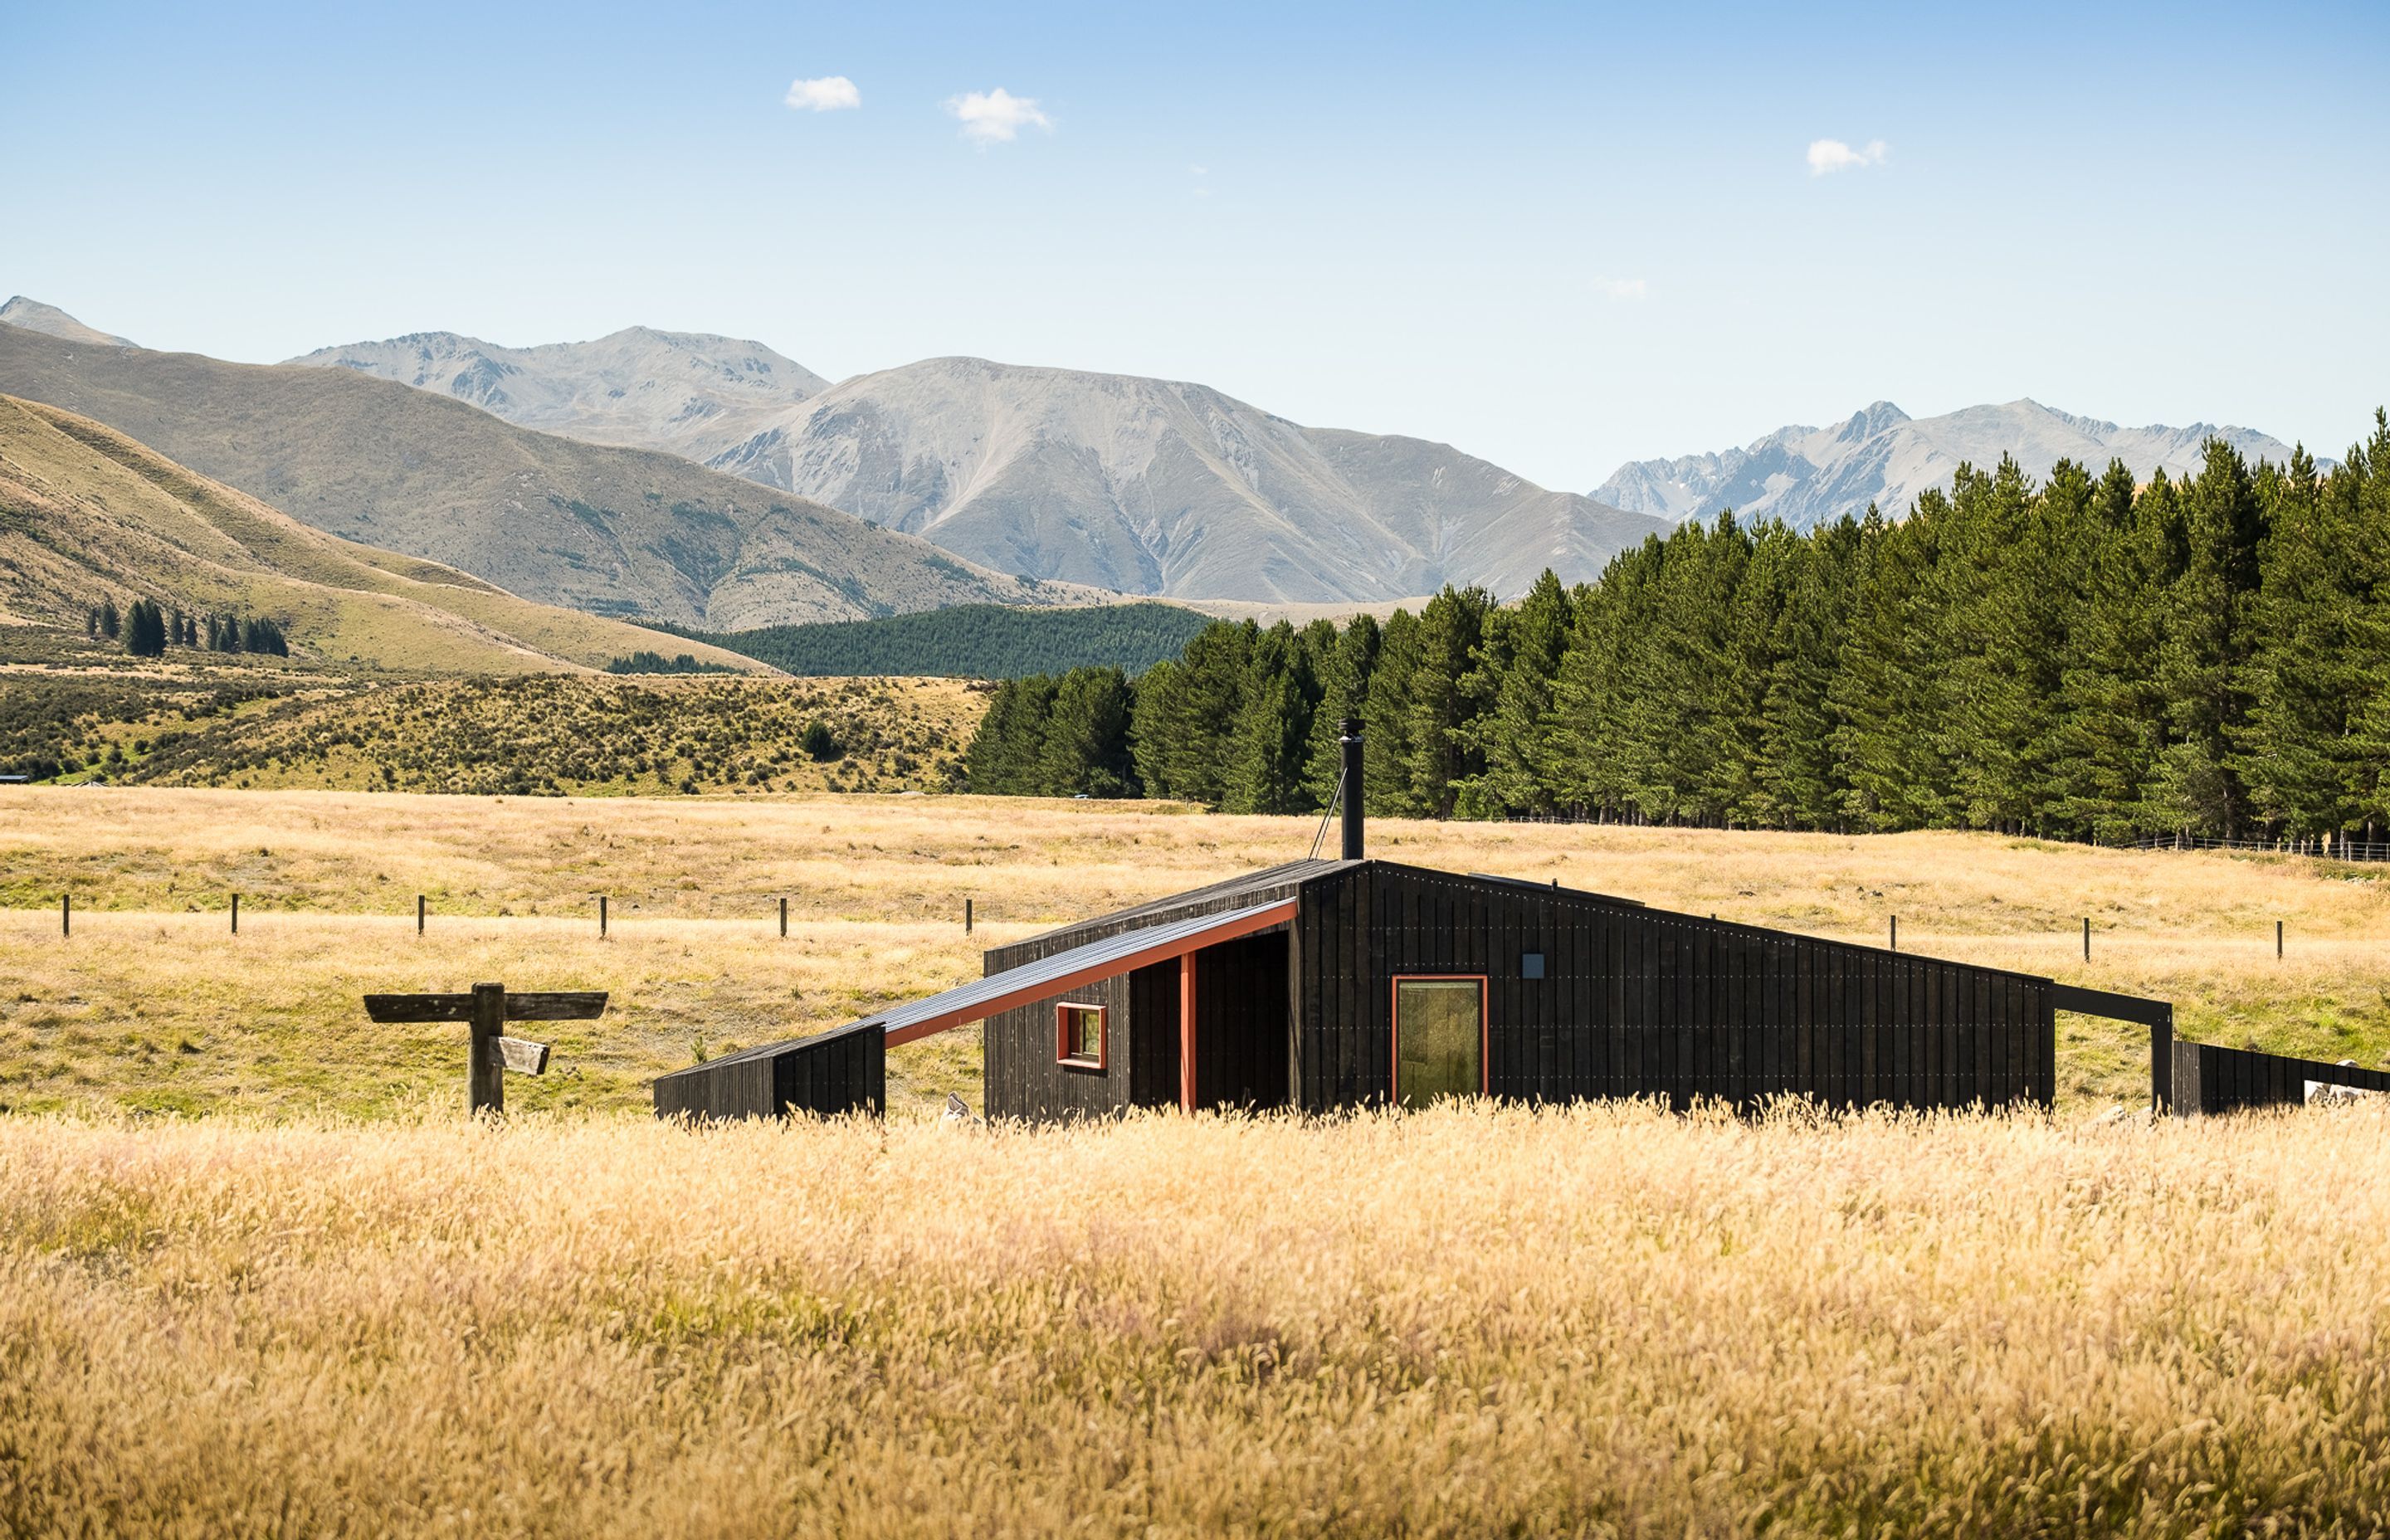 The site is permeated with native tussock grasses and more refined planting, which allows the cabin to nestle gently into the land and sets up a sense of arrival as you meander down the driveway.